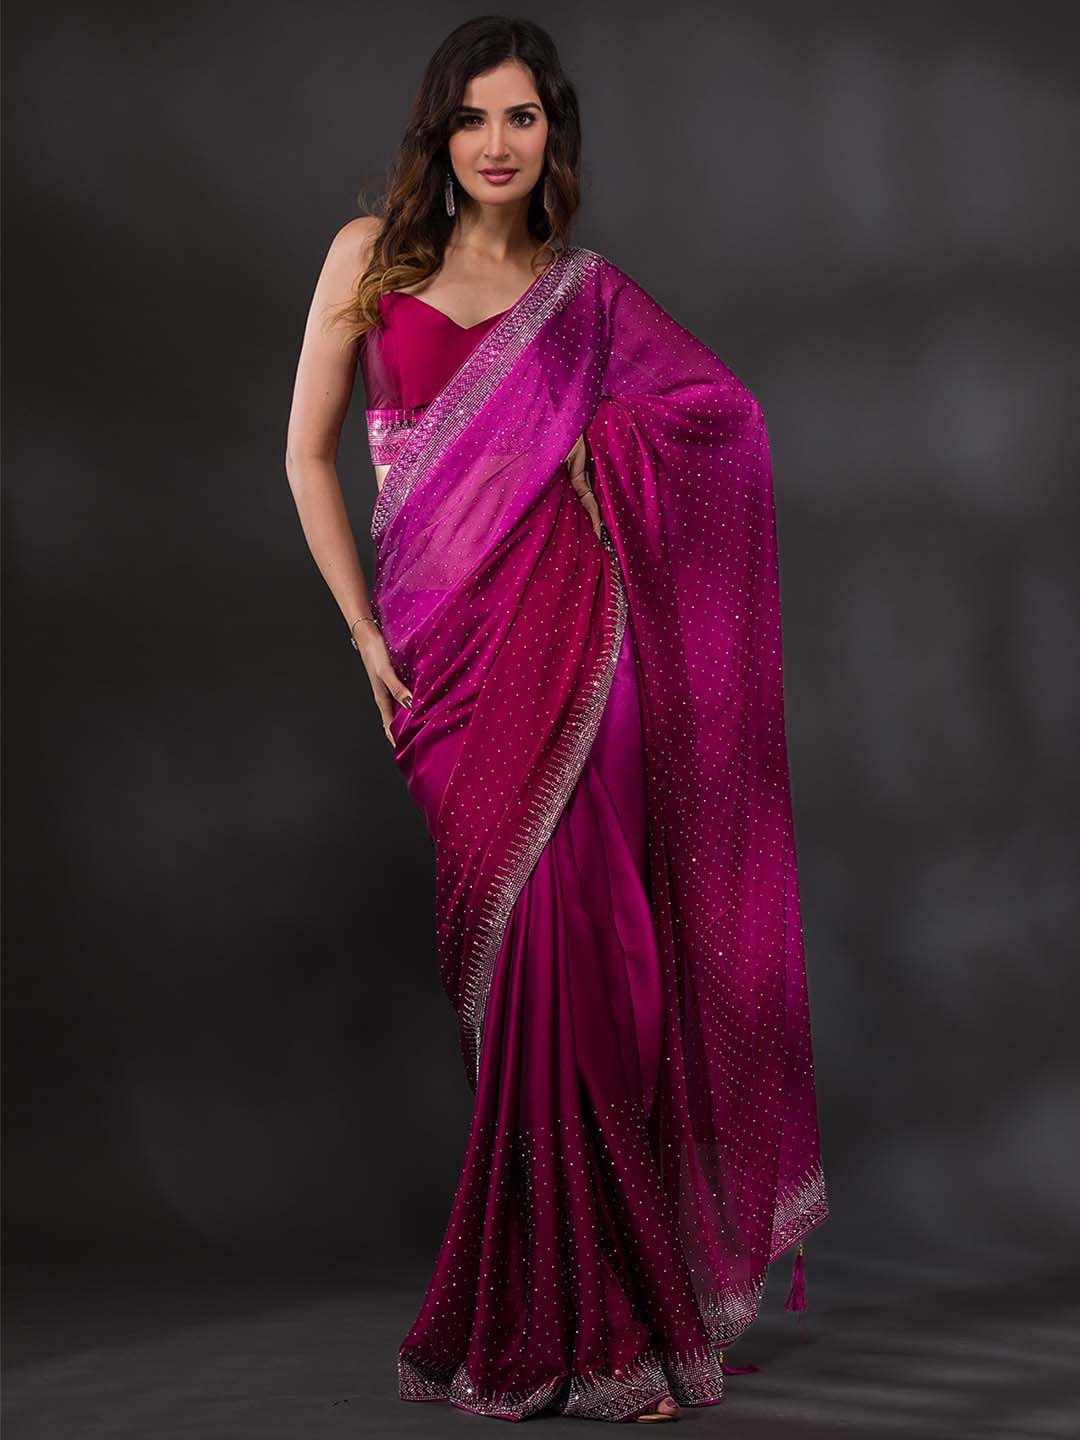 Koskii Women Maroon & Silver-Toned Beads and Stones Embellished Saree Price in India